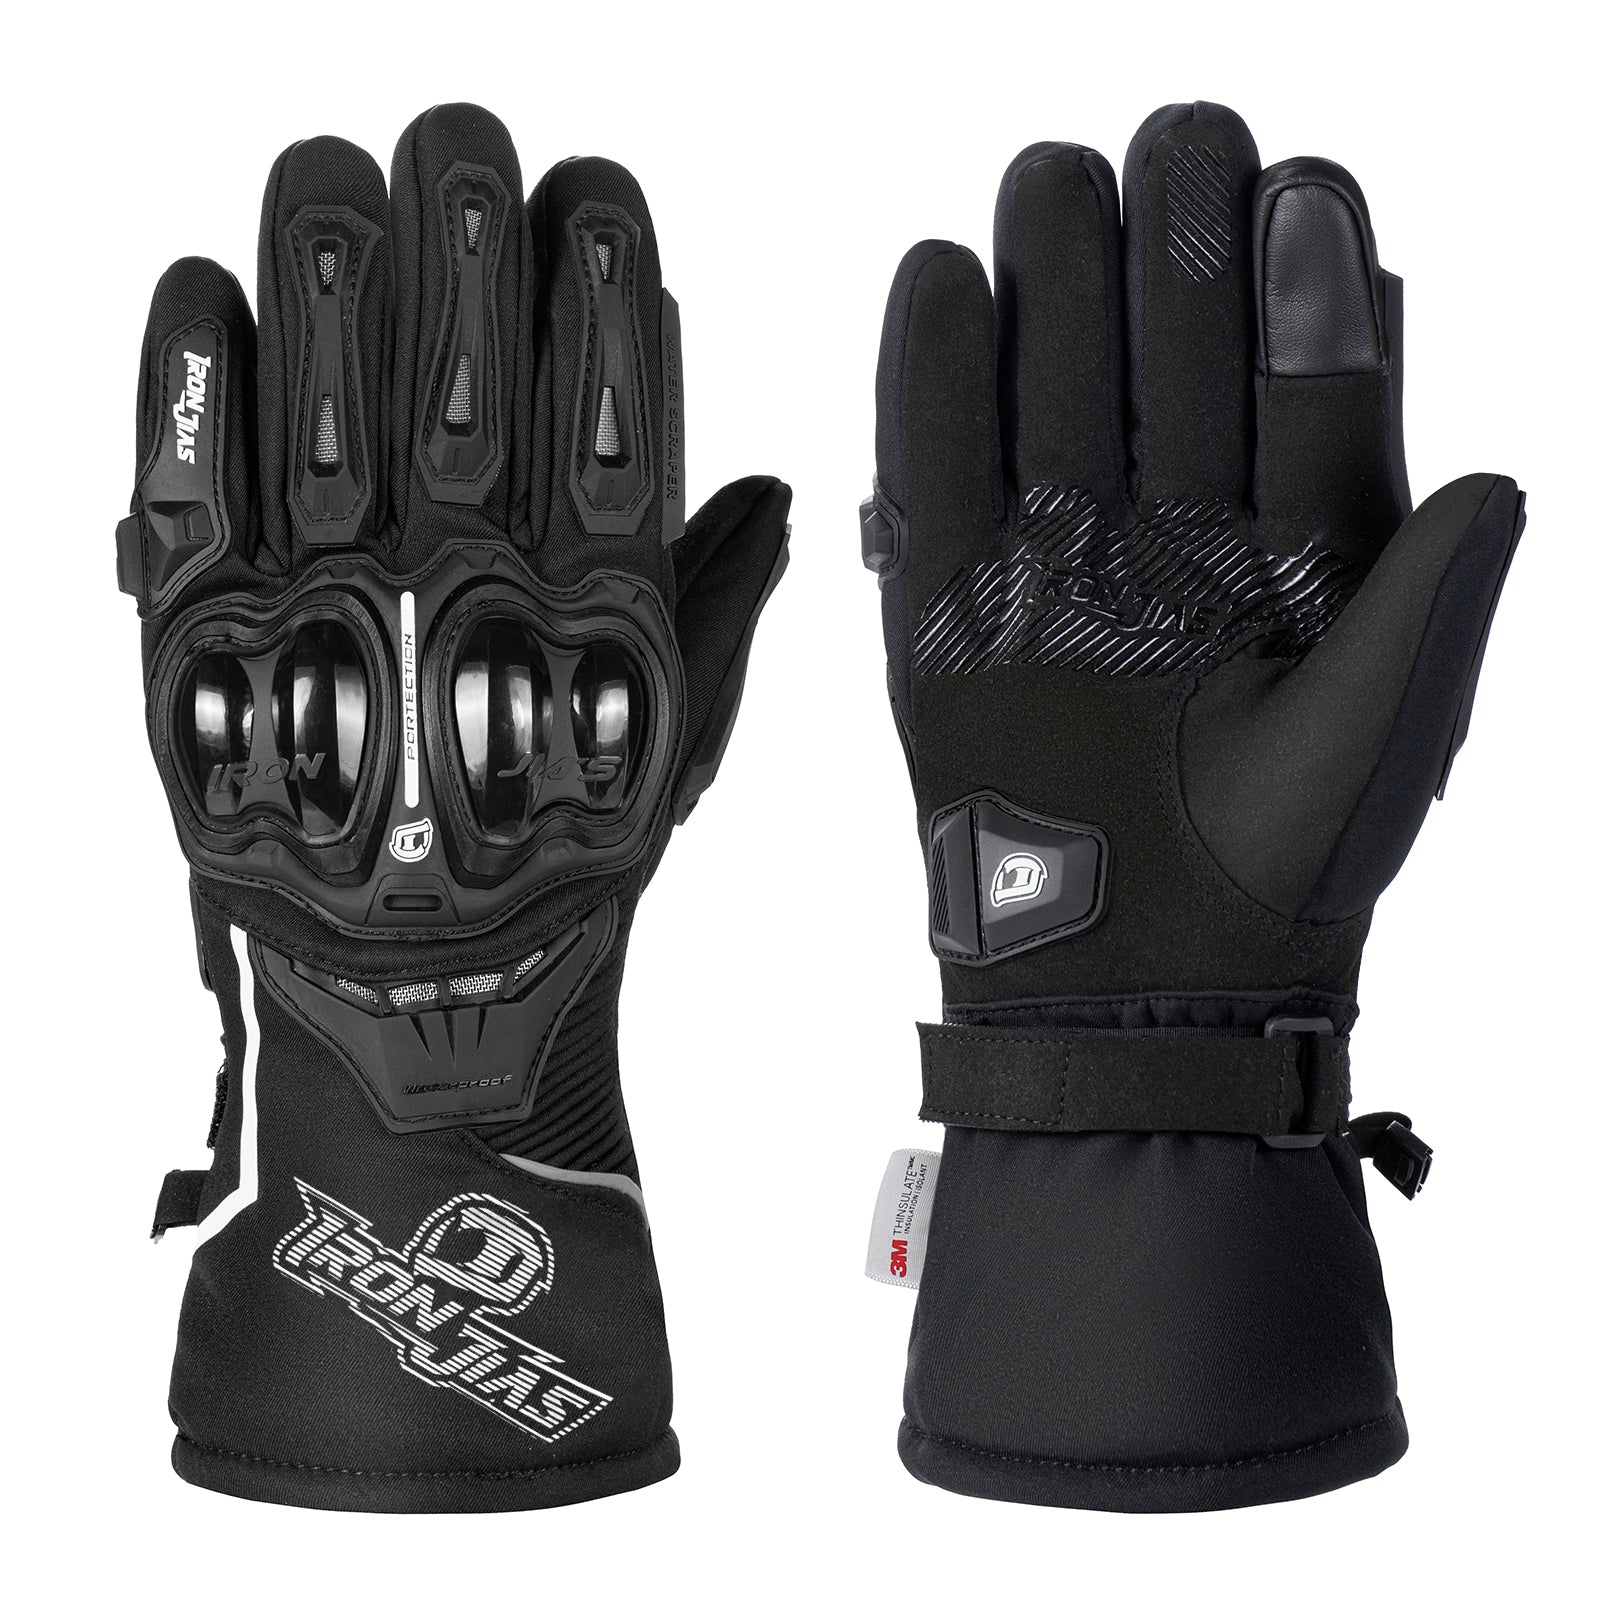 IRONJIAS Winter Warm Waterproof Protective Motorcycle Riding Gloves